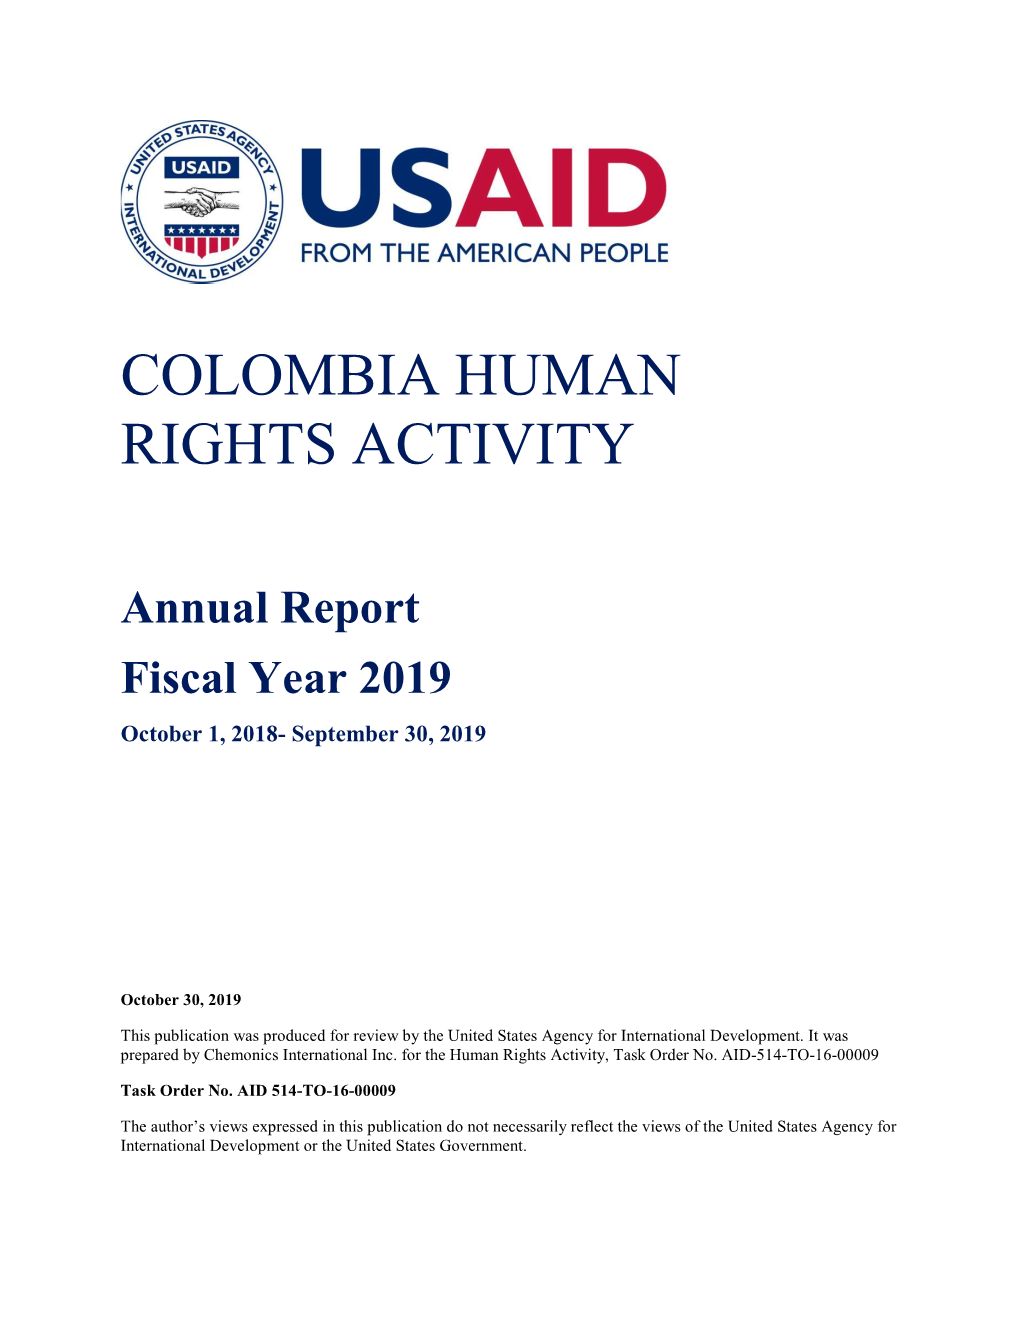 Colombia Human Rights Activity